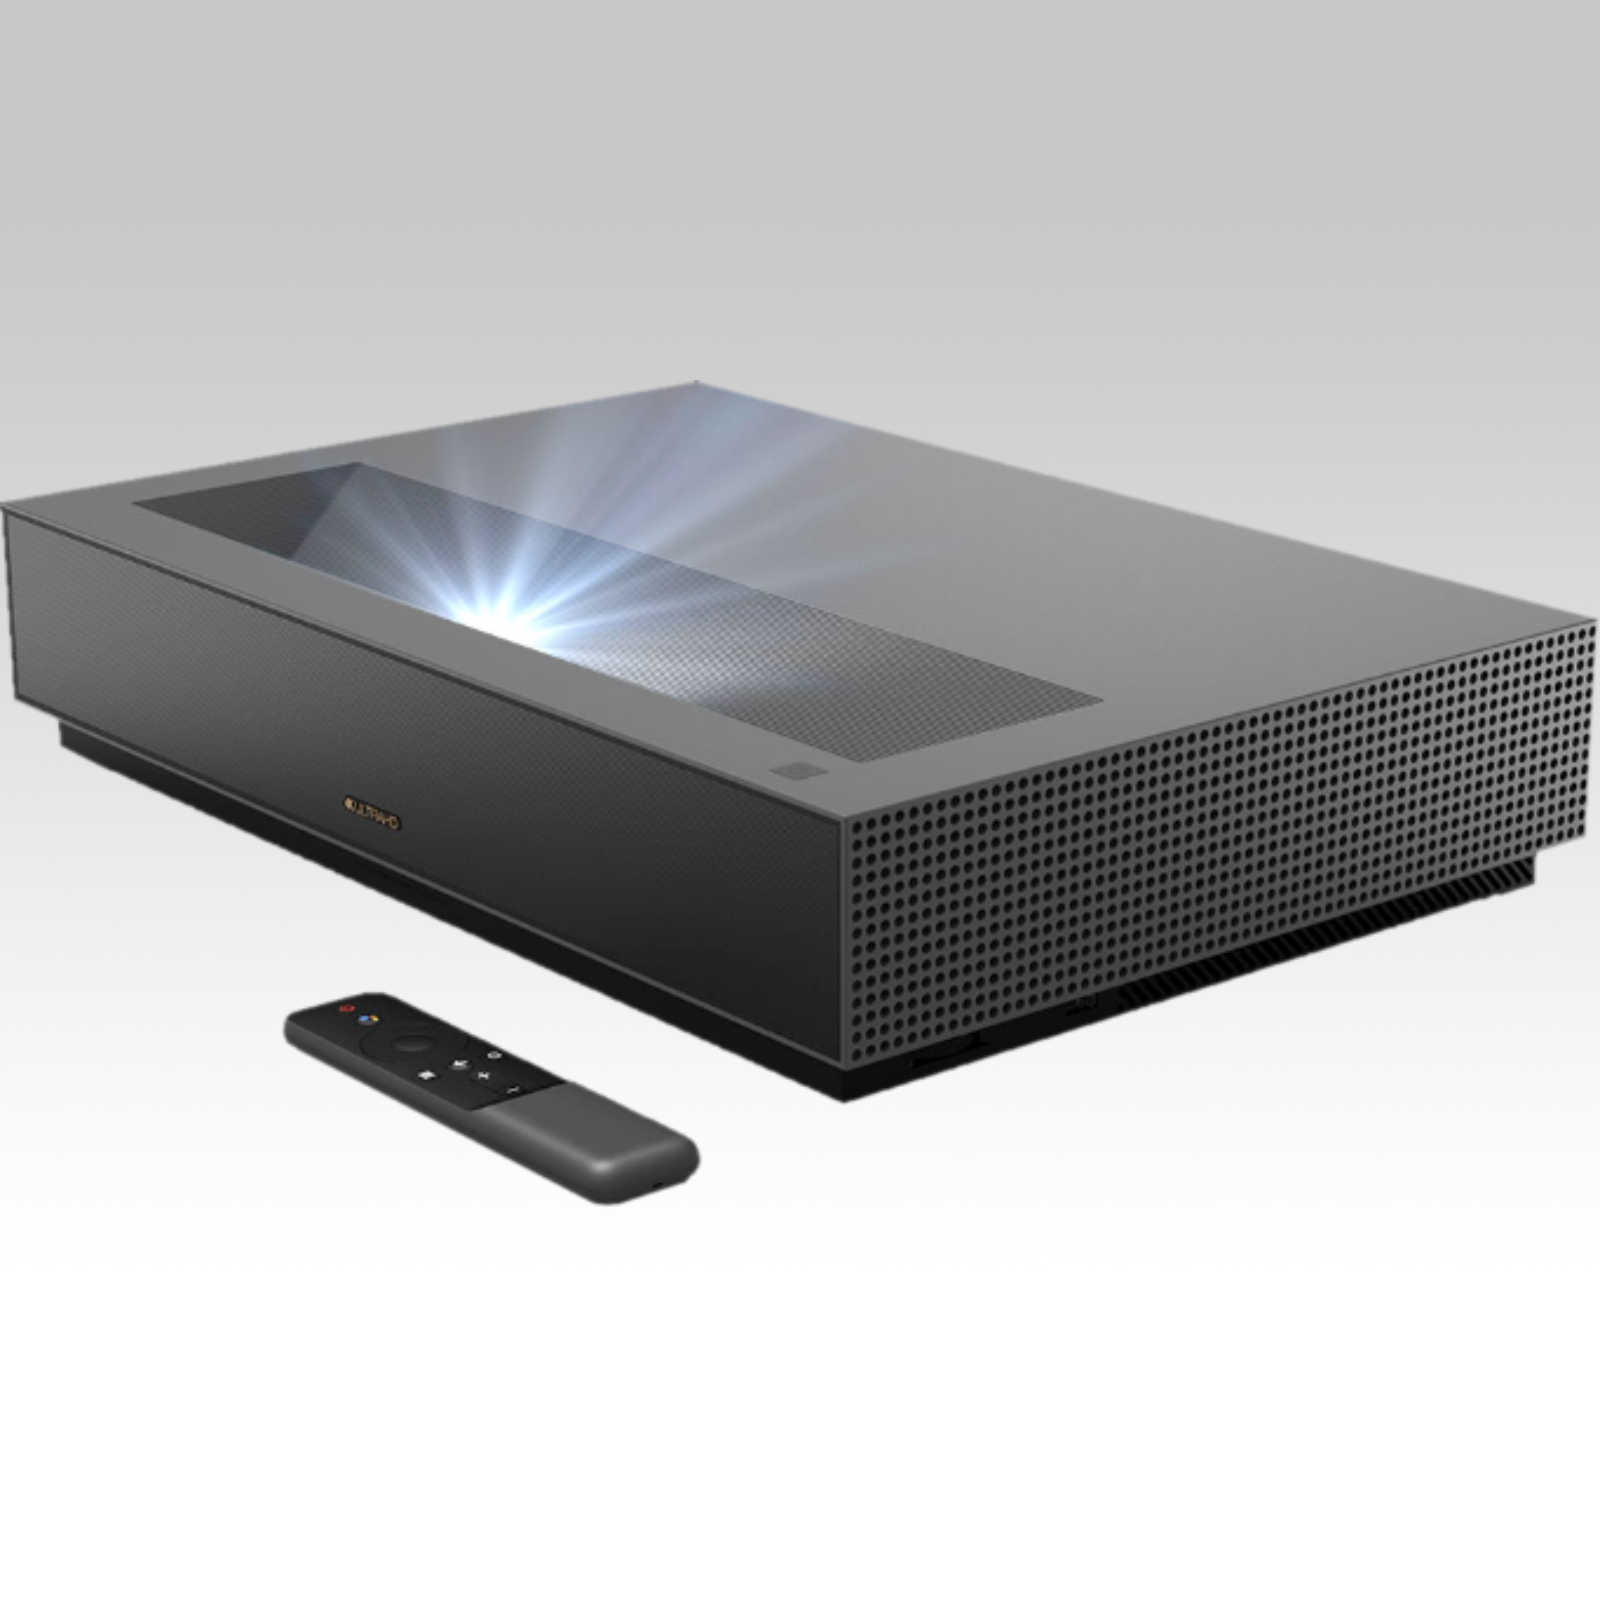 Triple-laser projector throws big-screen 4K visuals from inches away